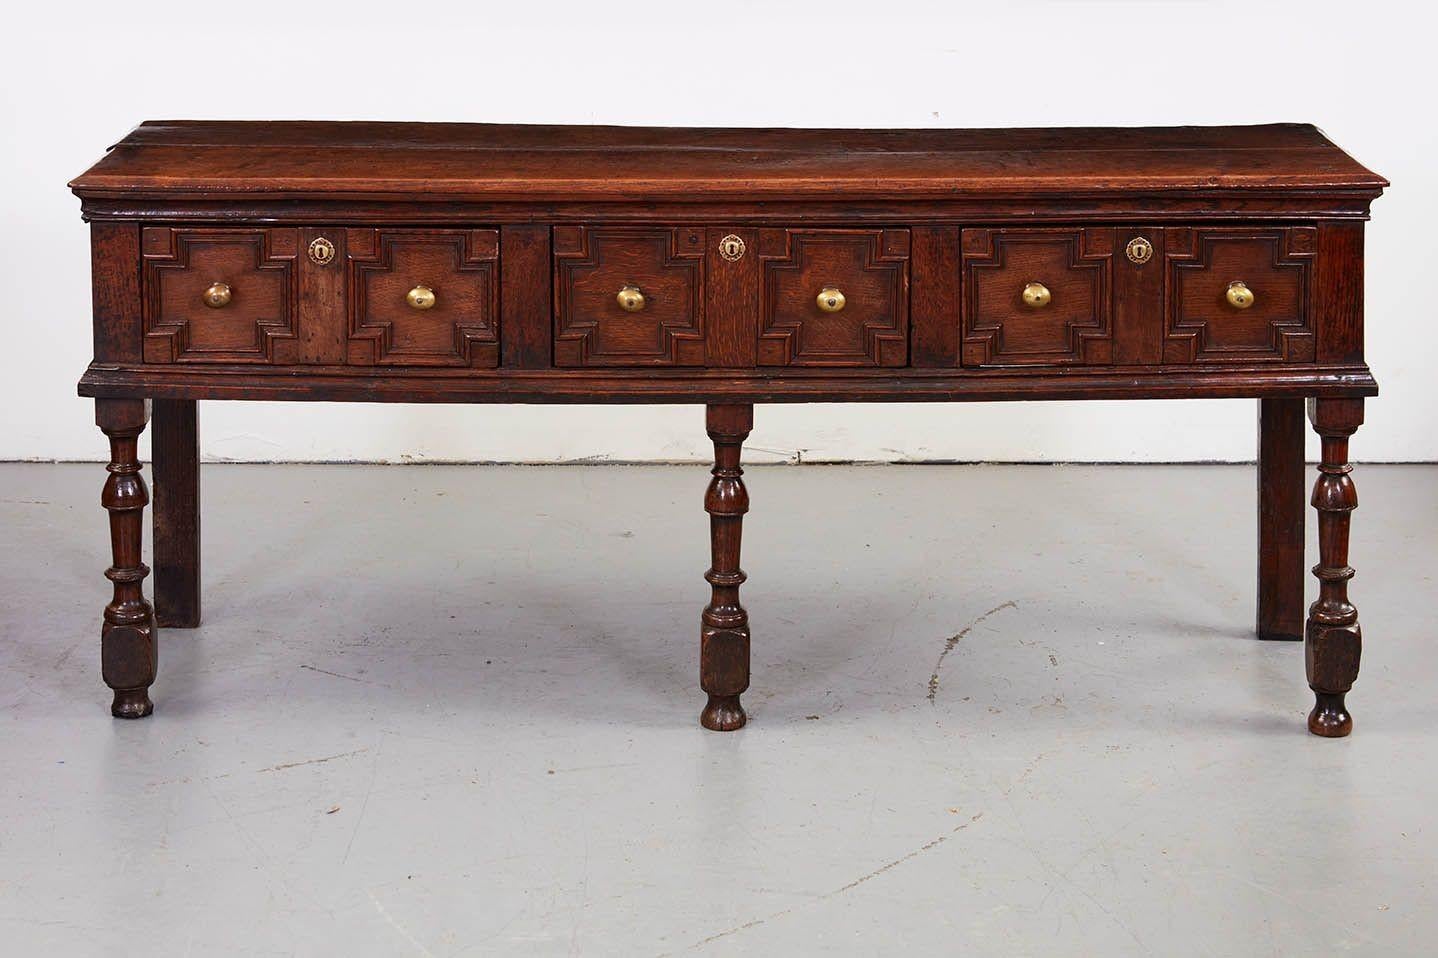 Fine English late 17th Century oak low dresser, the two plank top with beveled edge over three drawers with geometric molded fronts, on three nicely turned front legs and two plain square rear legs, the whole possessing very good rich color and